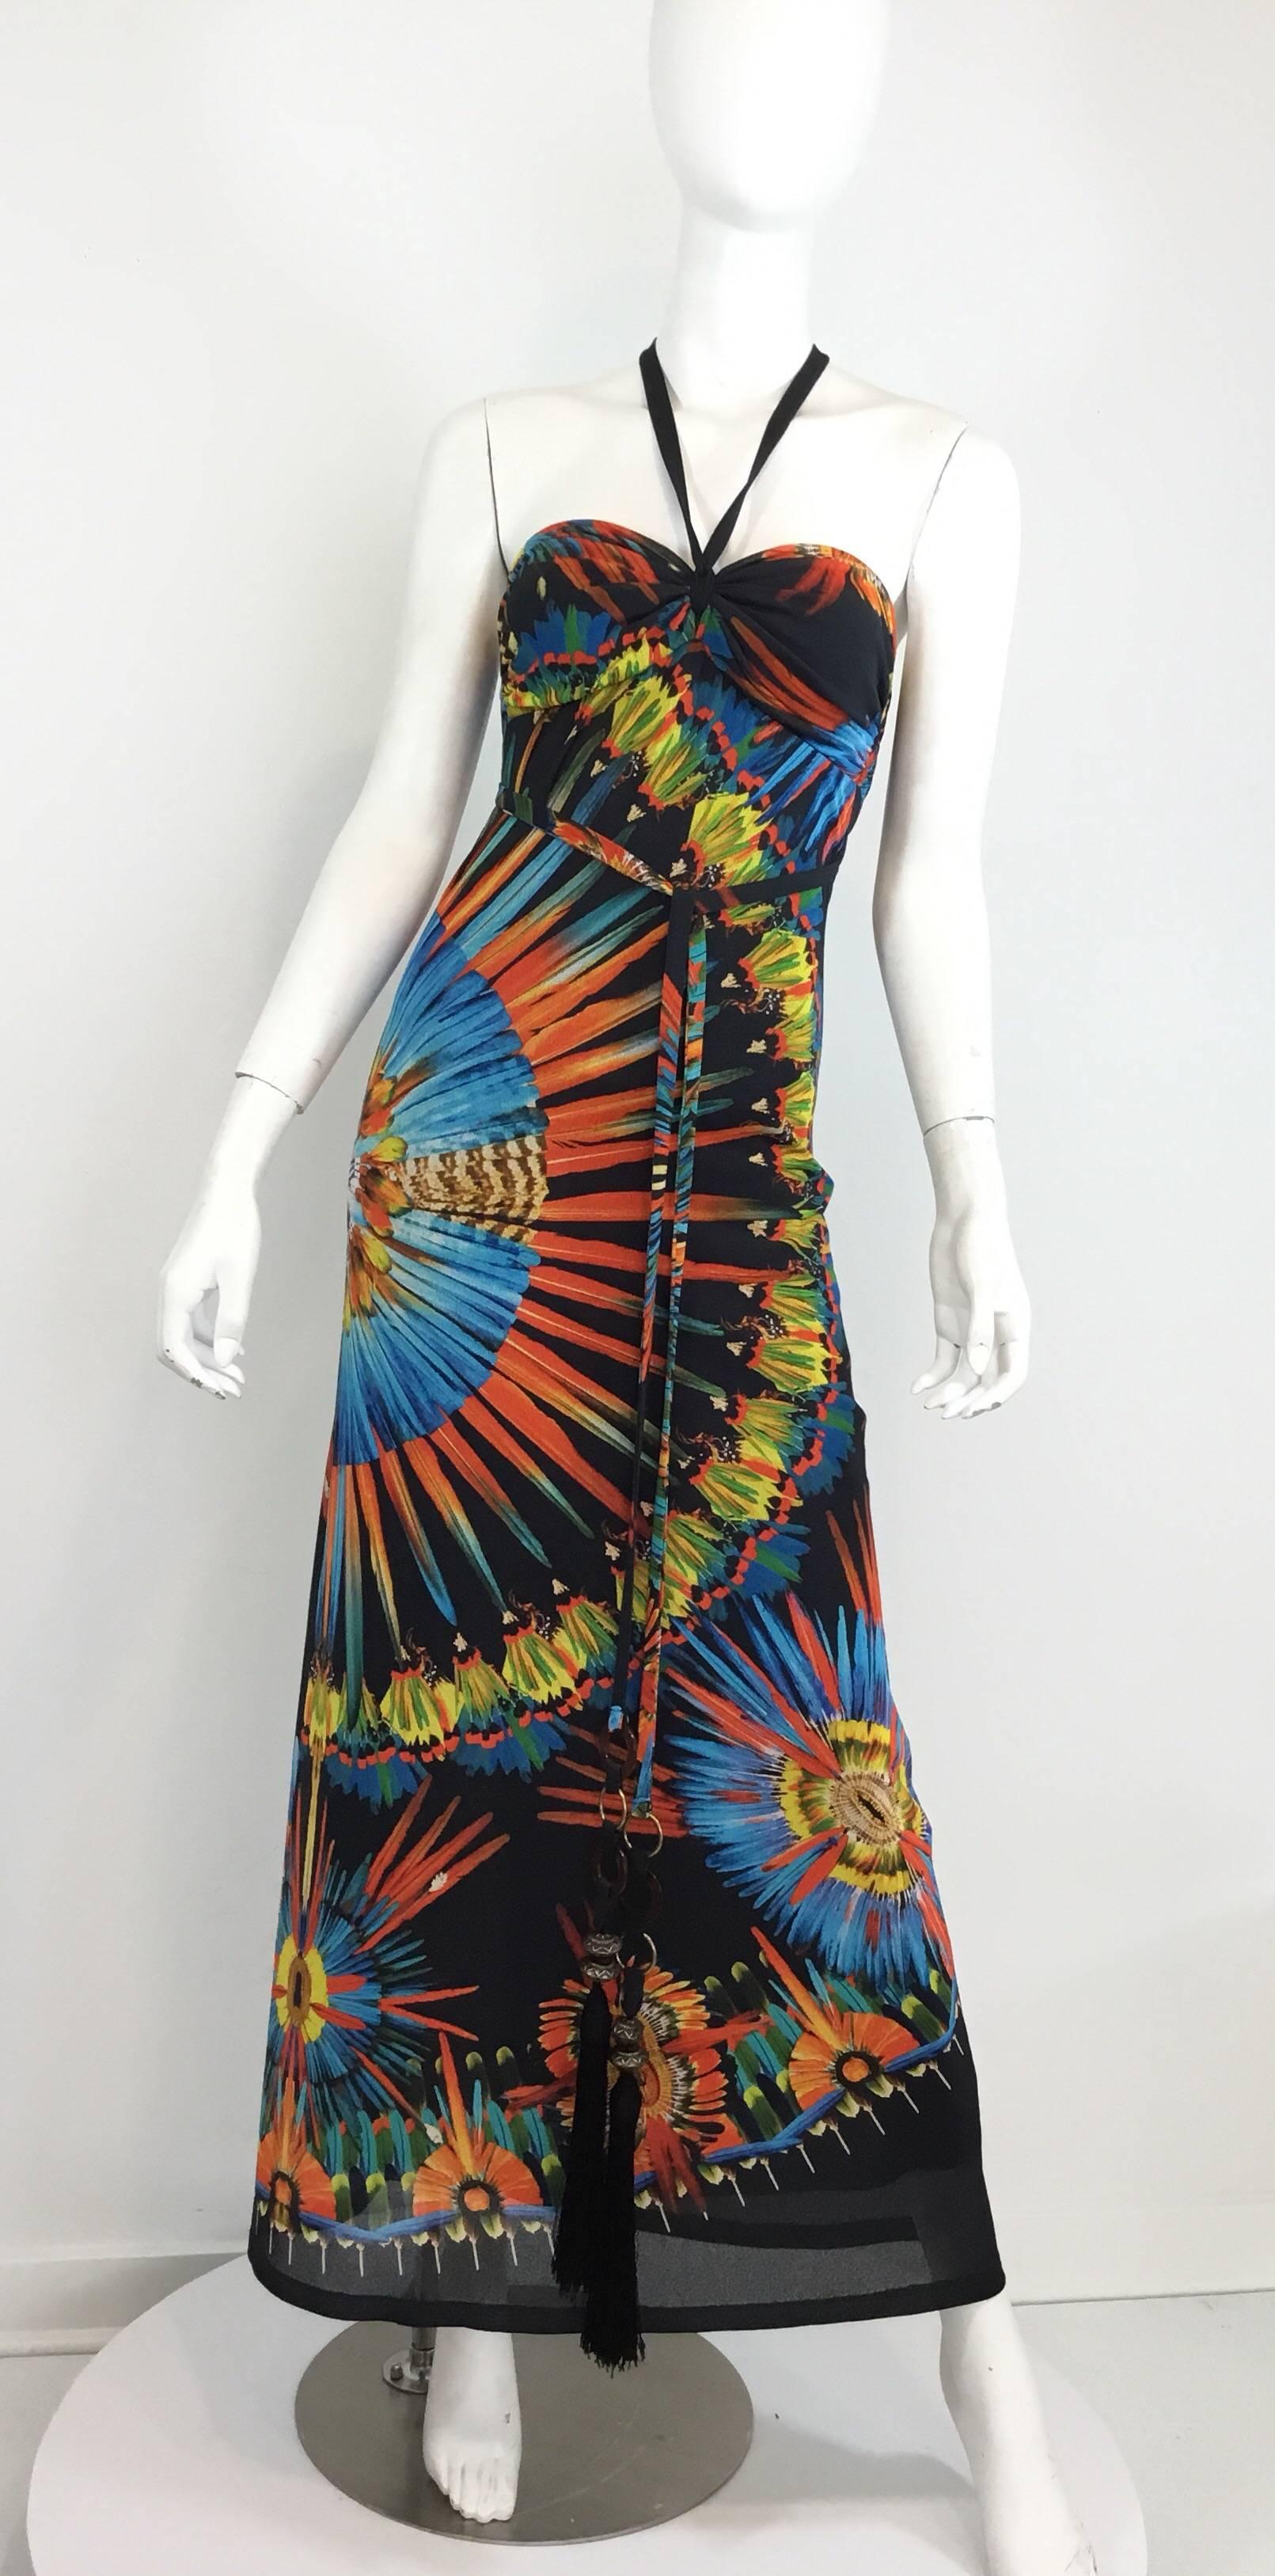 Jean Paul Gaultier maxi dress featured a bright and colorful print, halter style with a long tassel & tortoise disk string tie closure that can be worn multiple ways. Very light weight stocking knit. Dress is labeled a size S.

Garment has